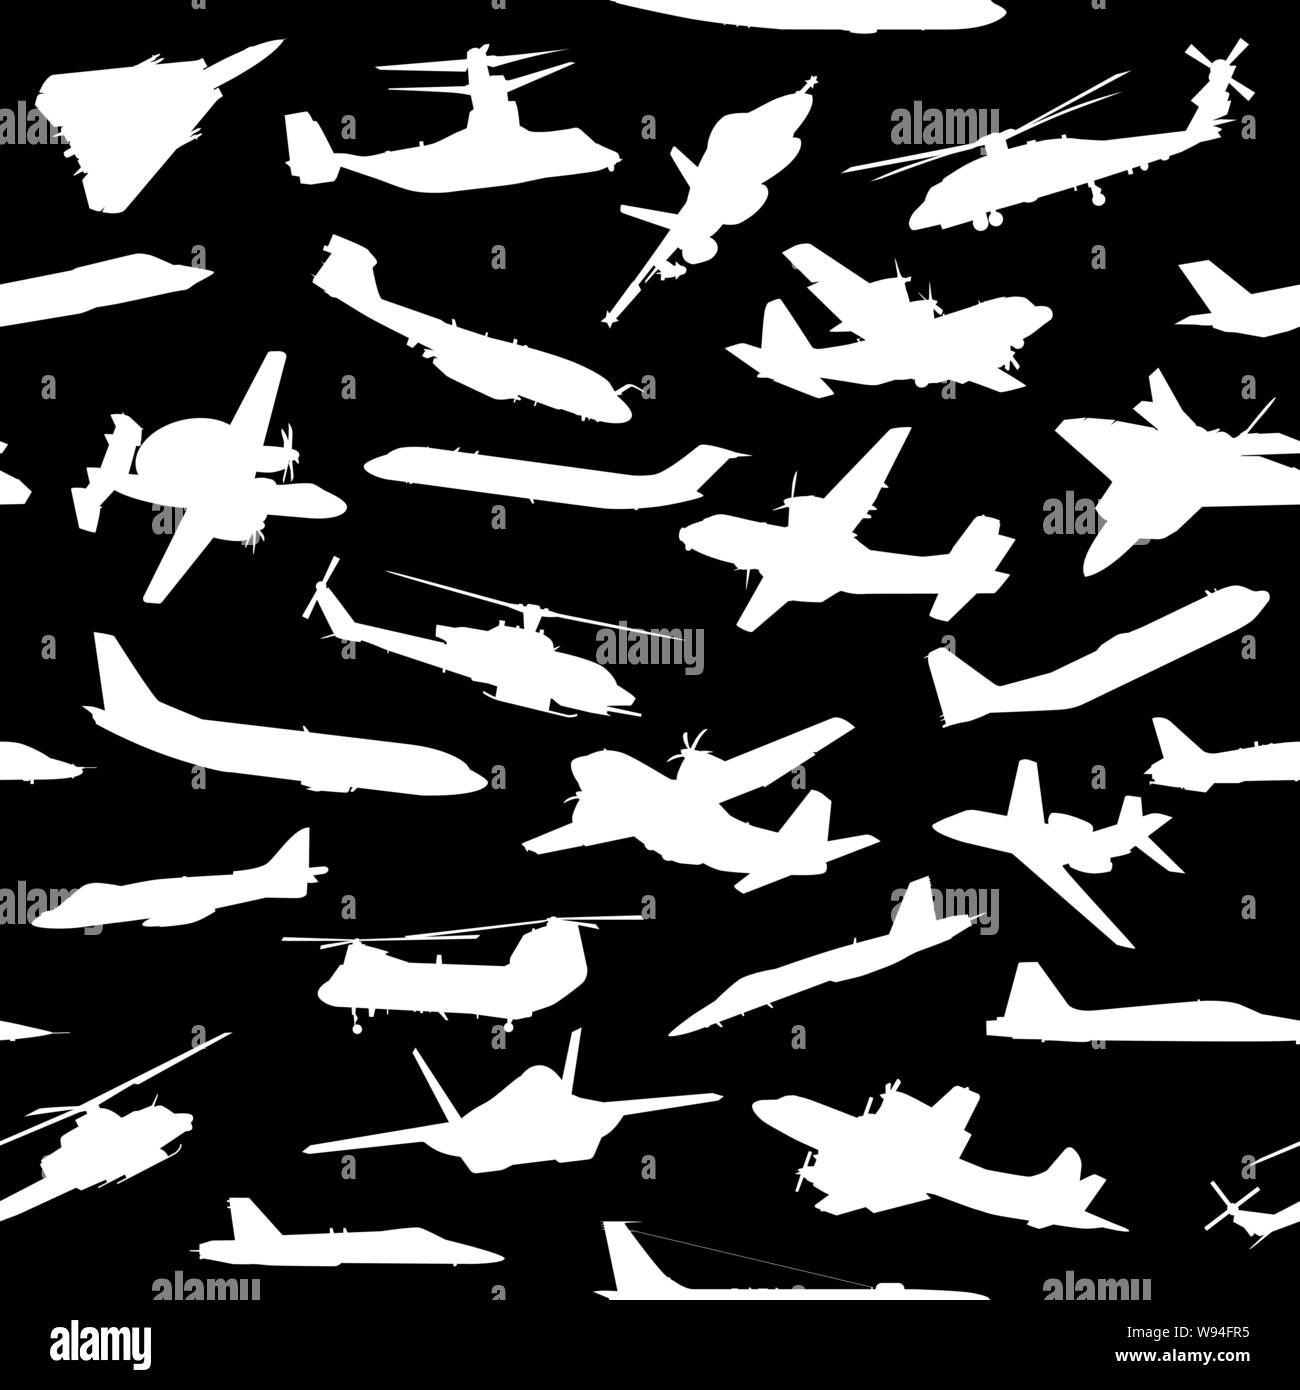 Airplane Silhouettes Aviation Themed Seamless Repeating Pattern Vector Stock Vector